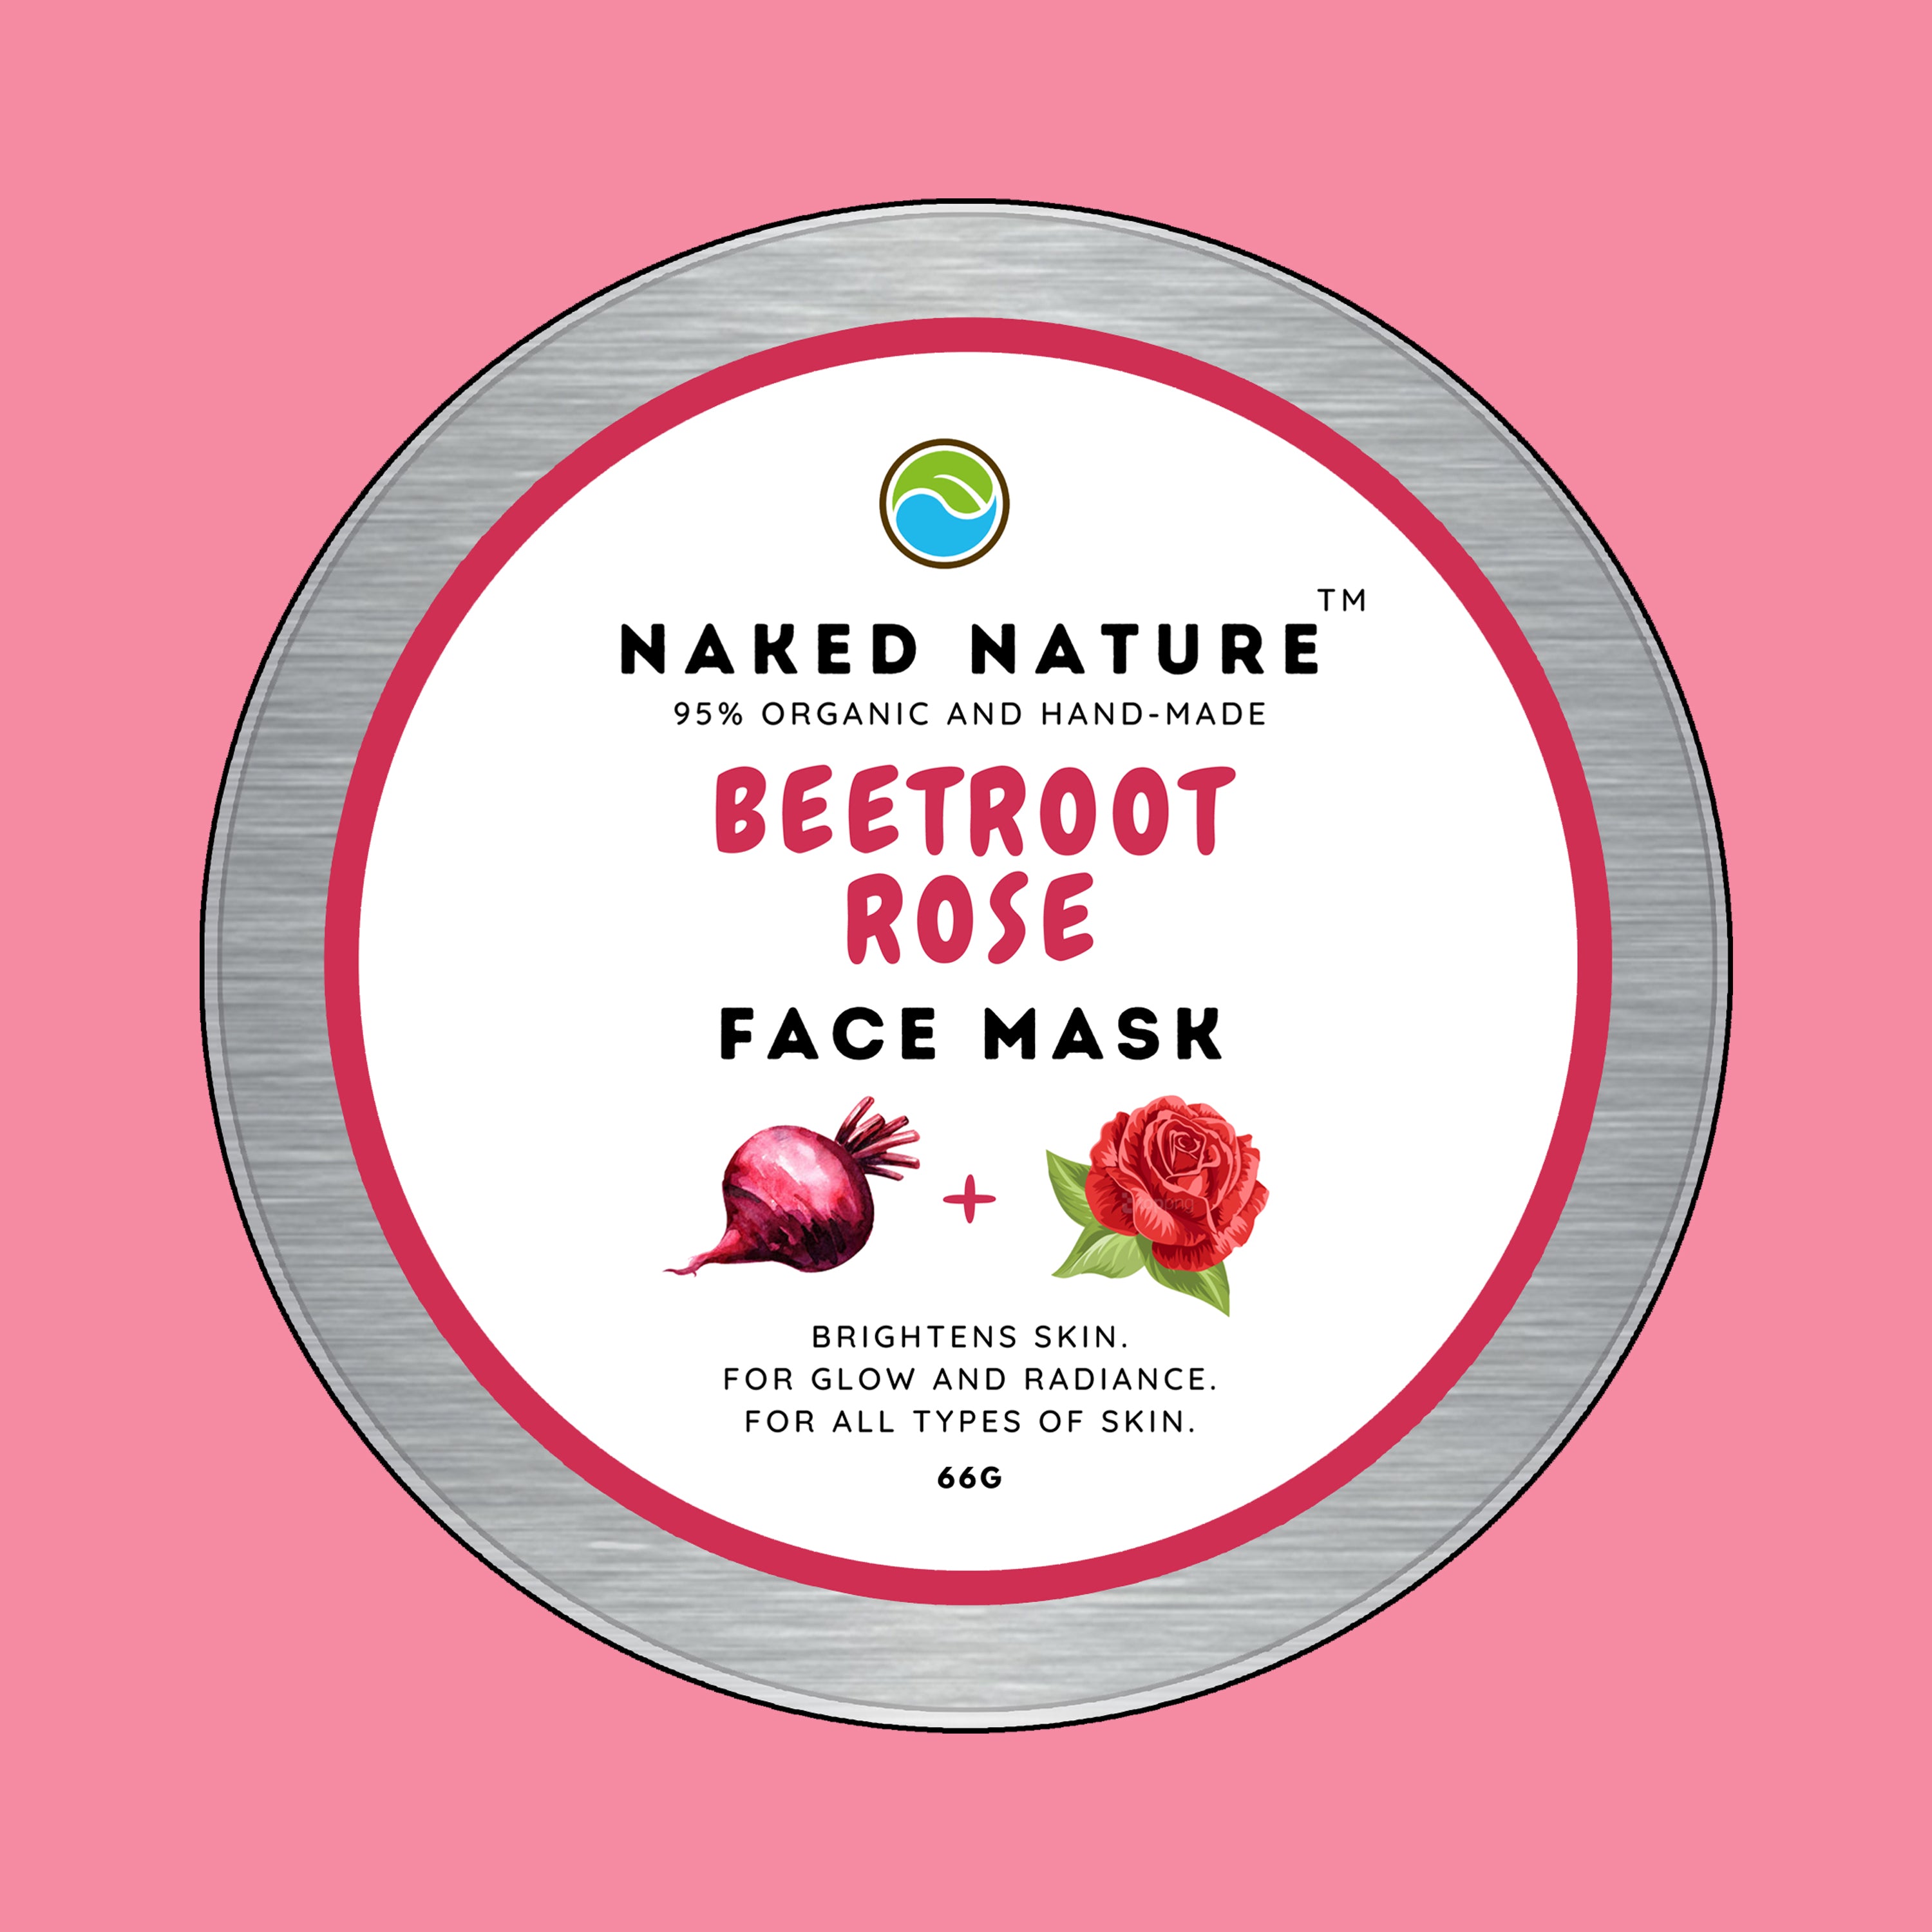 Beetroot + Rose Face Mask - Gives Clear and Pink Skin Texture.